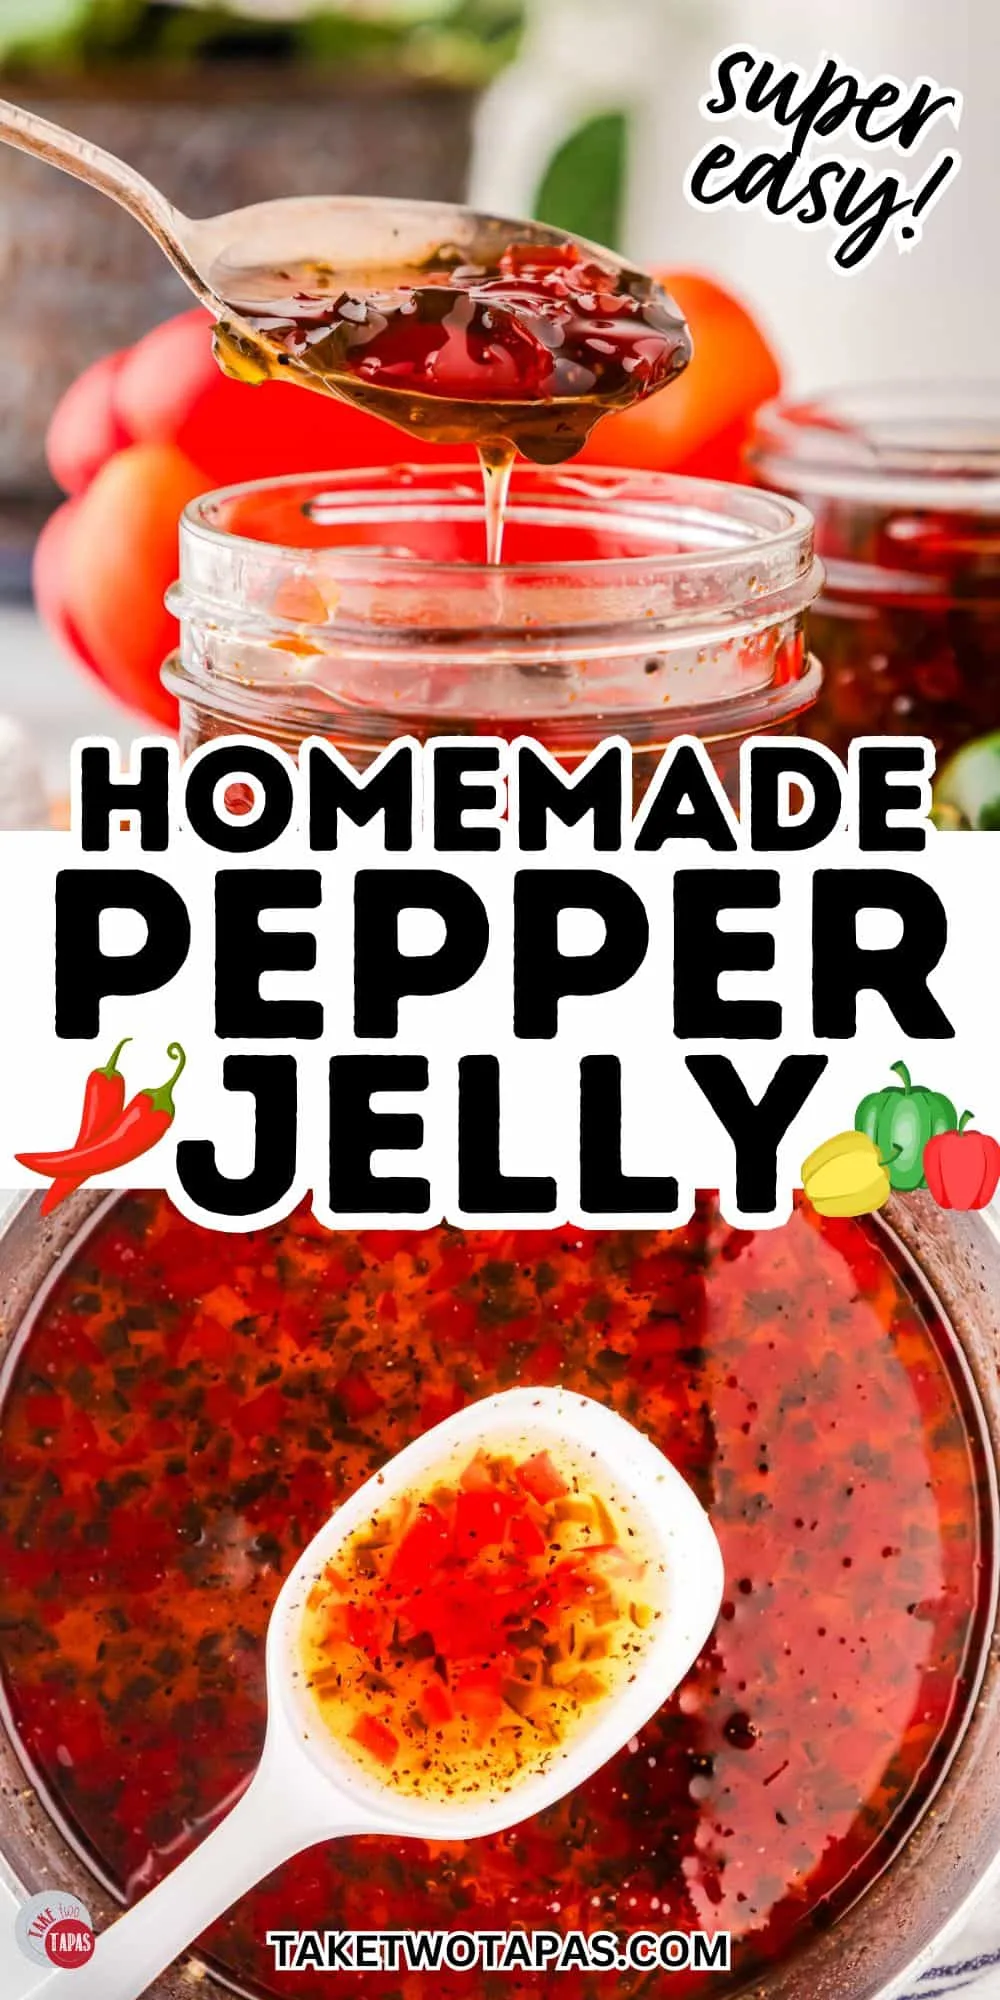 homemade hot pepper jelly is a great condiment for sandwiches!